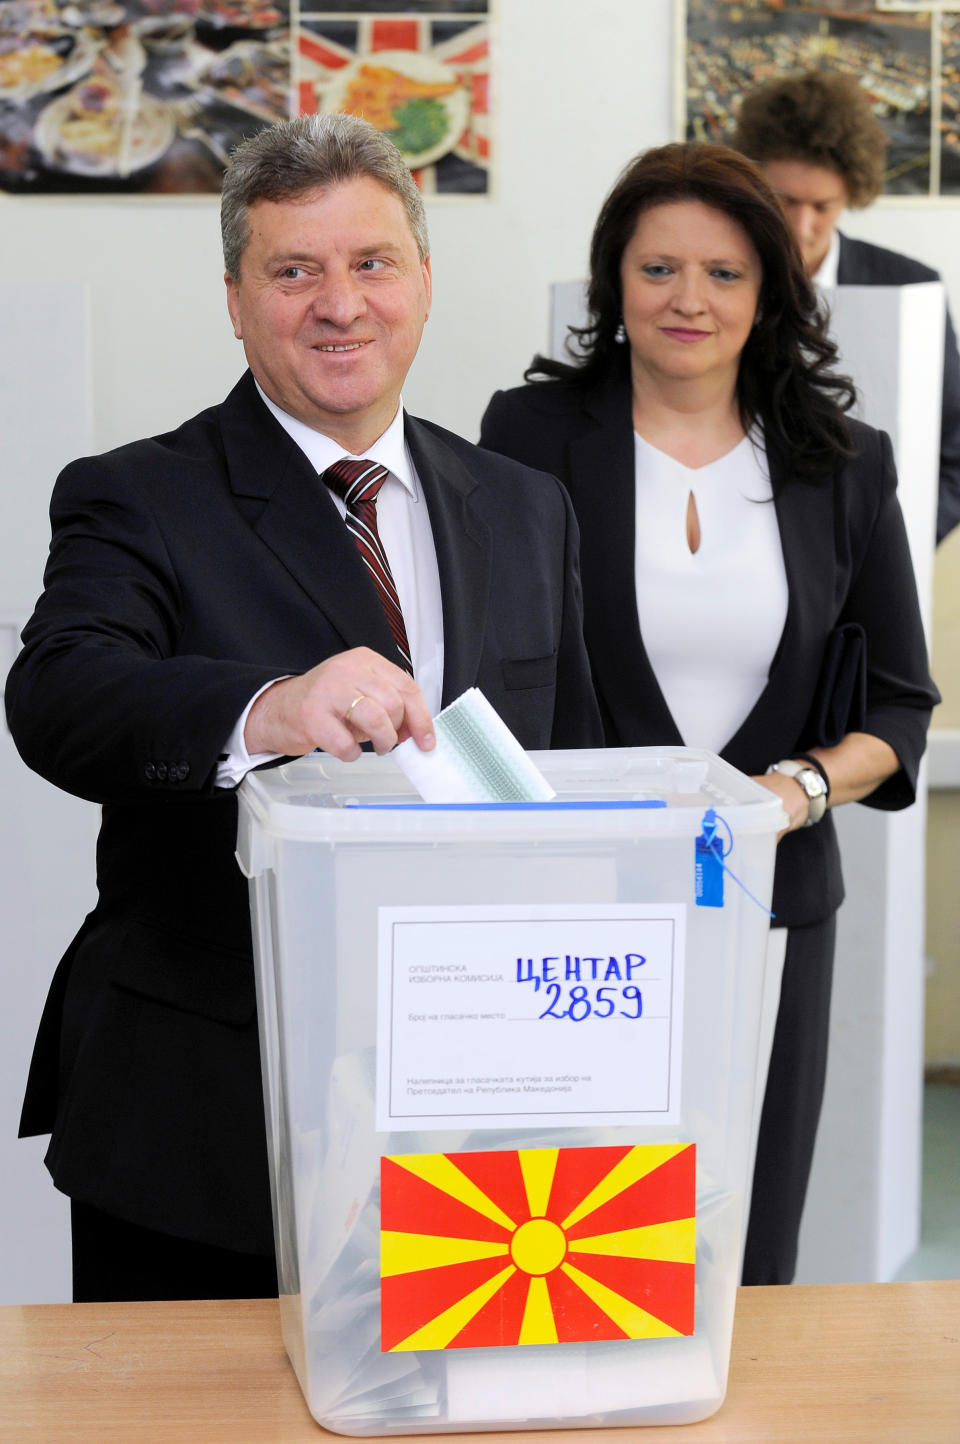 Seeking his second term, Gjorge Ivanov, left, the current Macedonian President and a candidate of the ruling conservative VMRO-DPMNE party, accompanied by his wife Maja Ivanova, right, casts his ballot for the presidential elections in Skopje, Macedonia, on Sunday, April 13, 2014. Macedonia votes on the fifth presidential elections since the country's independence. (AP Photo/Boris Grdanoski)